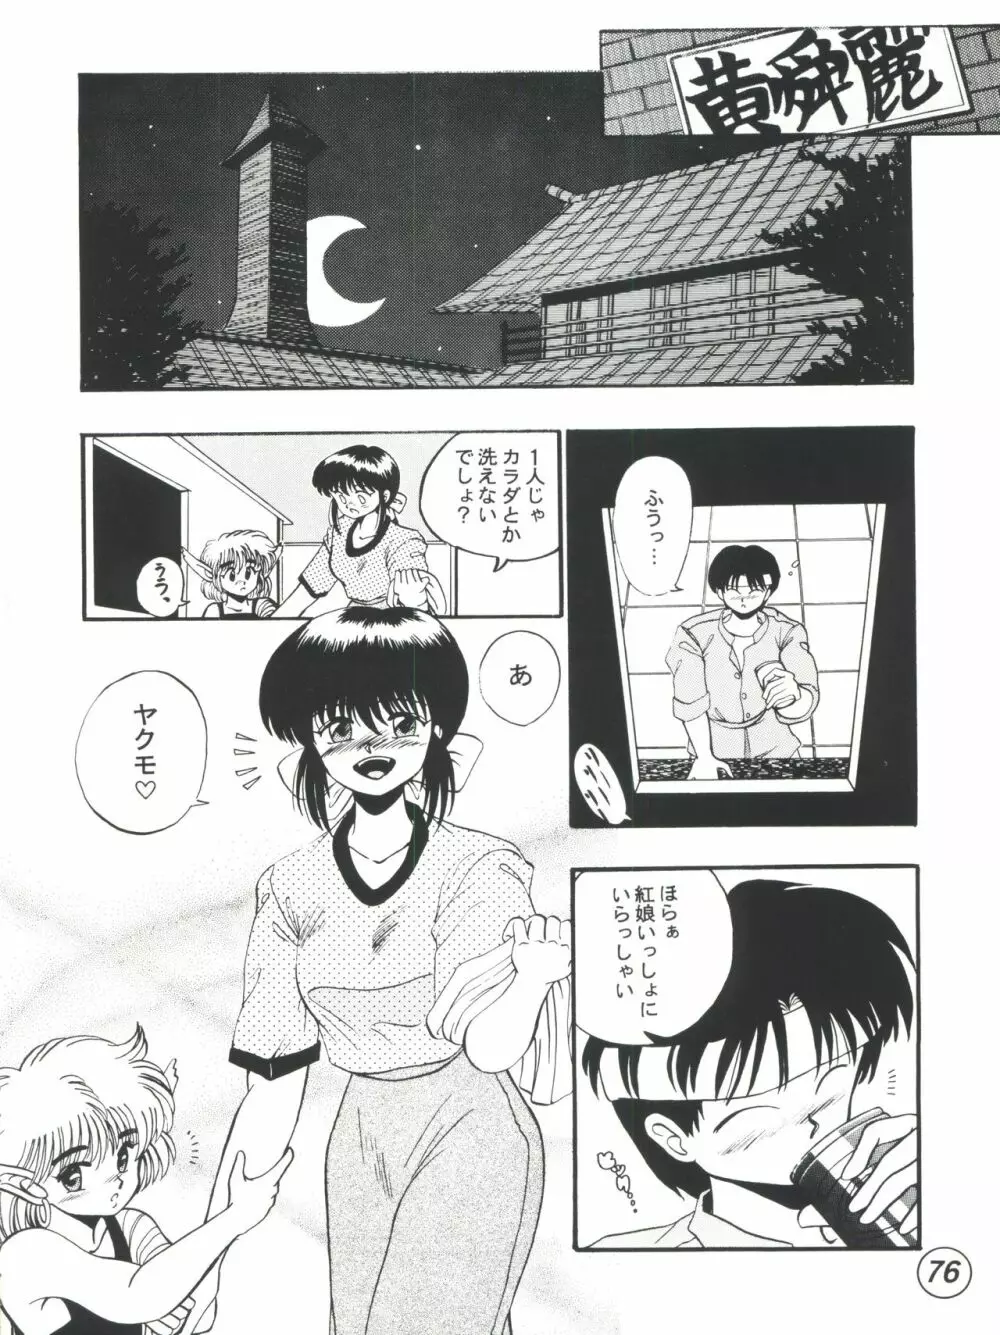 R TIME SPESIAL R古賀個人作品集5 - page78